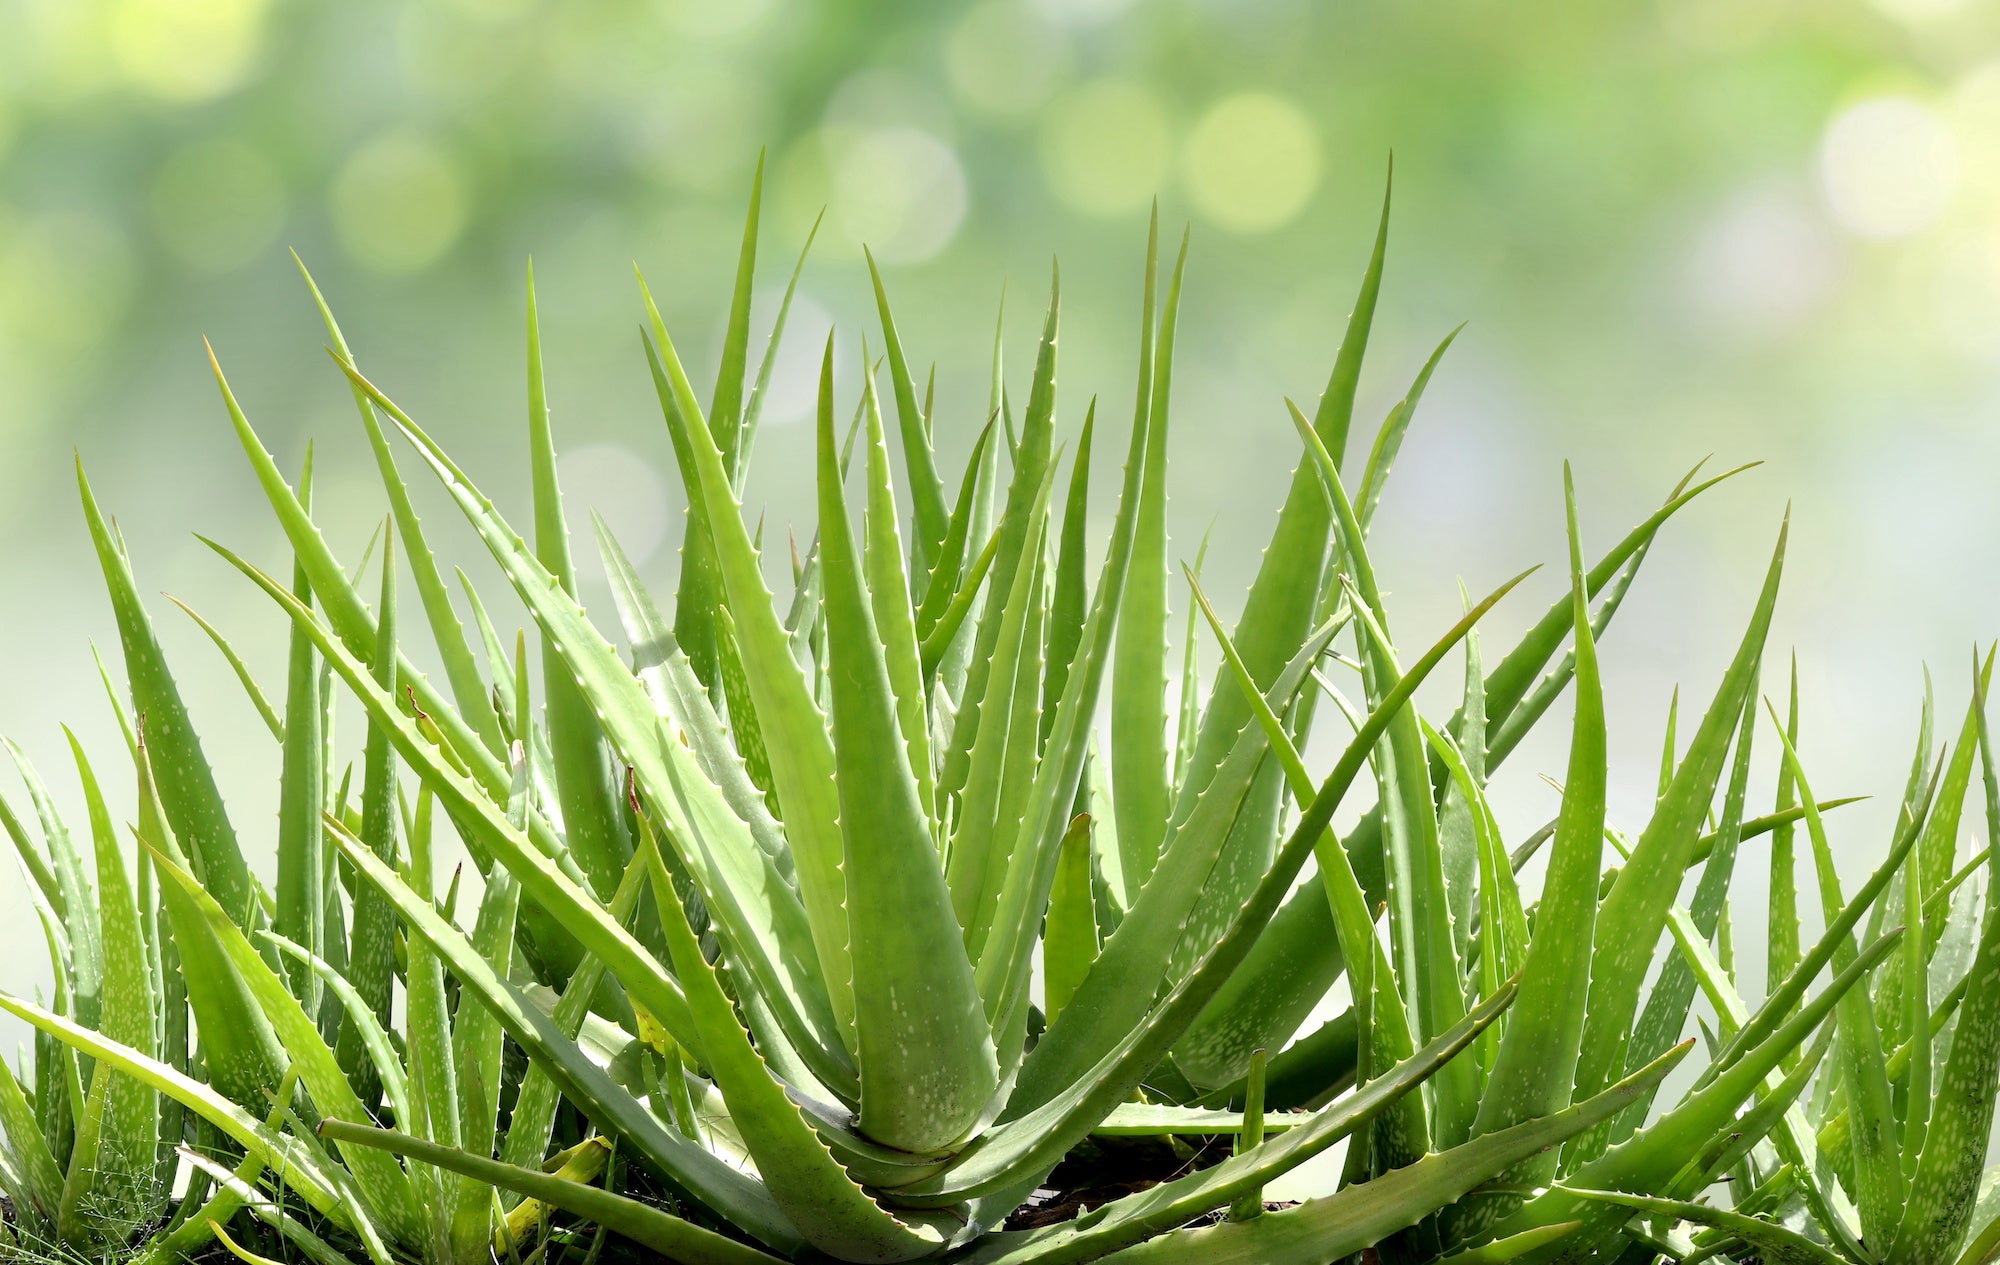 How to Incorporate Aloe into Your Skincare Routine for Radiant, Healthy-Looking Skin